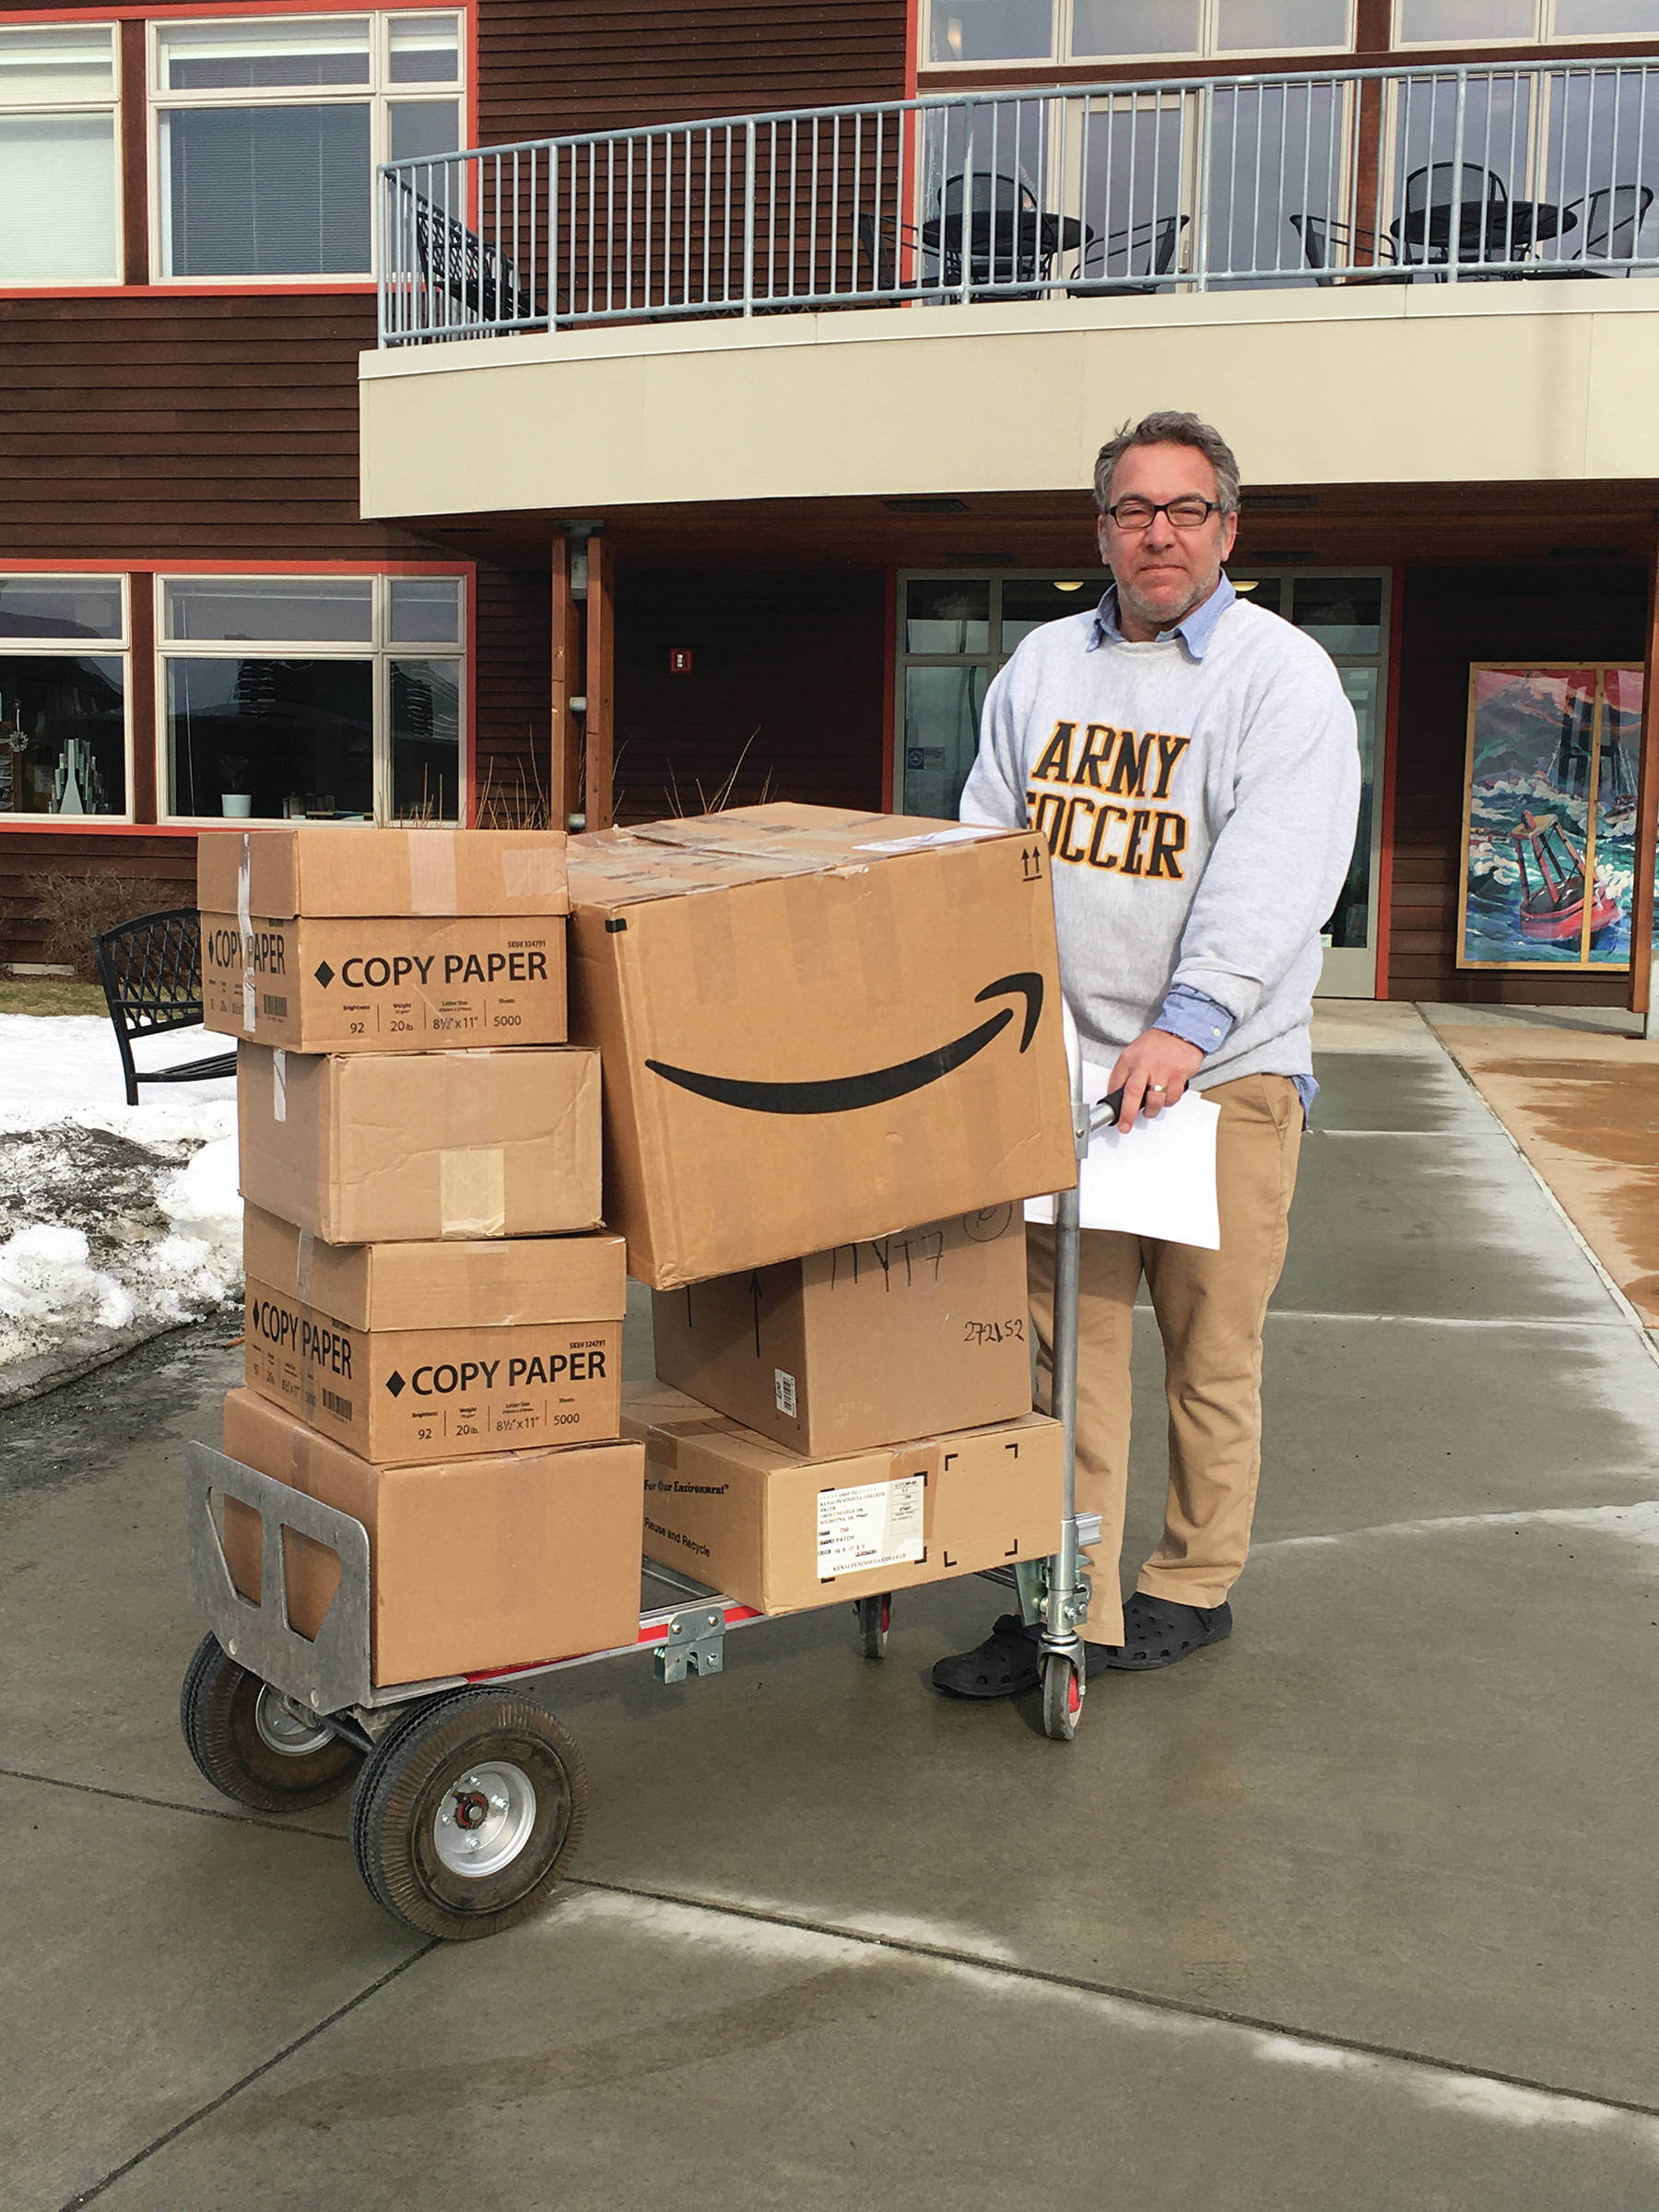 Kachemak Bay Campus Director Reid Brewer moves boxes of personal protective gear from the college for transport to South Peninsula Hospital on March 25, 2020, in Homer, Alaska. (Photo courtesy Susan Kaplan)